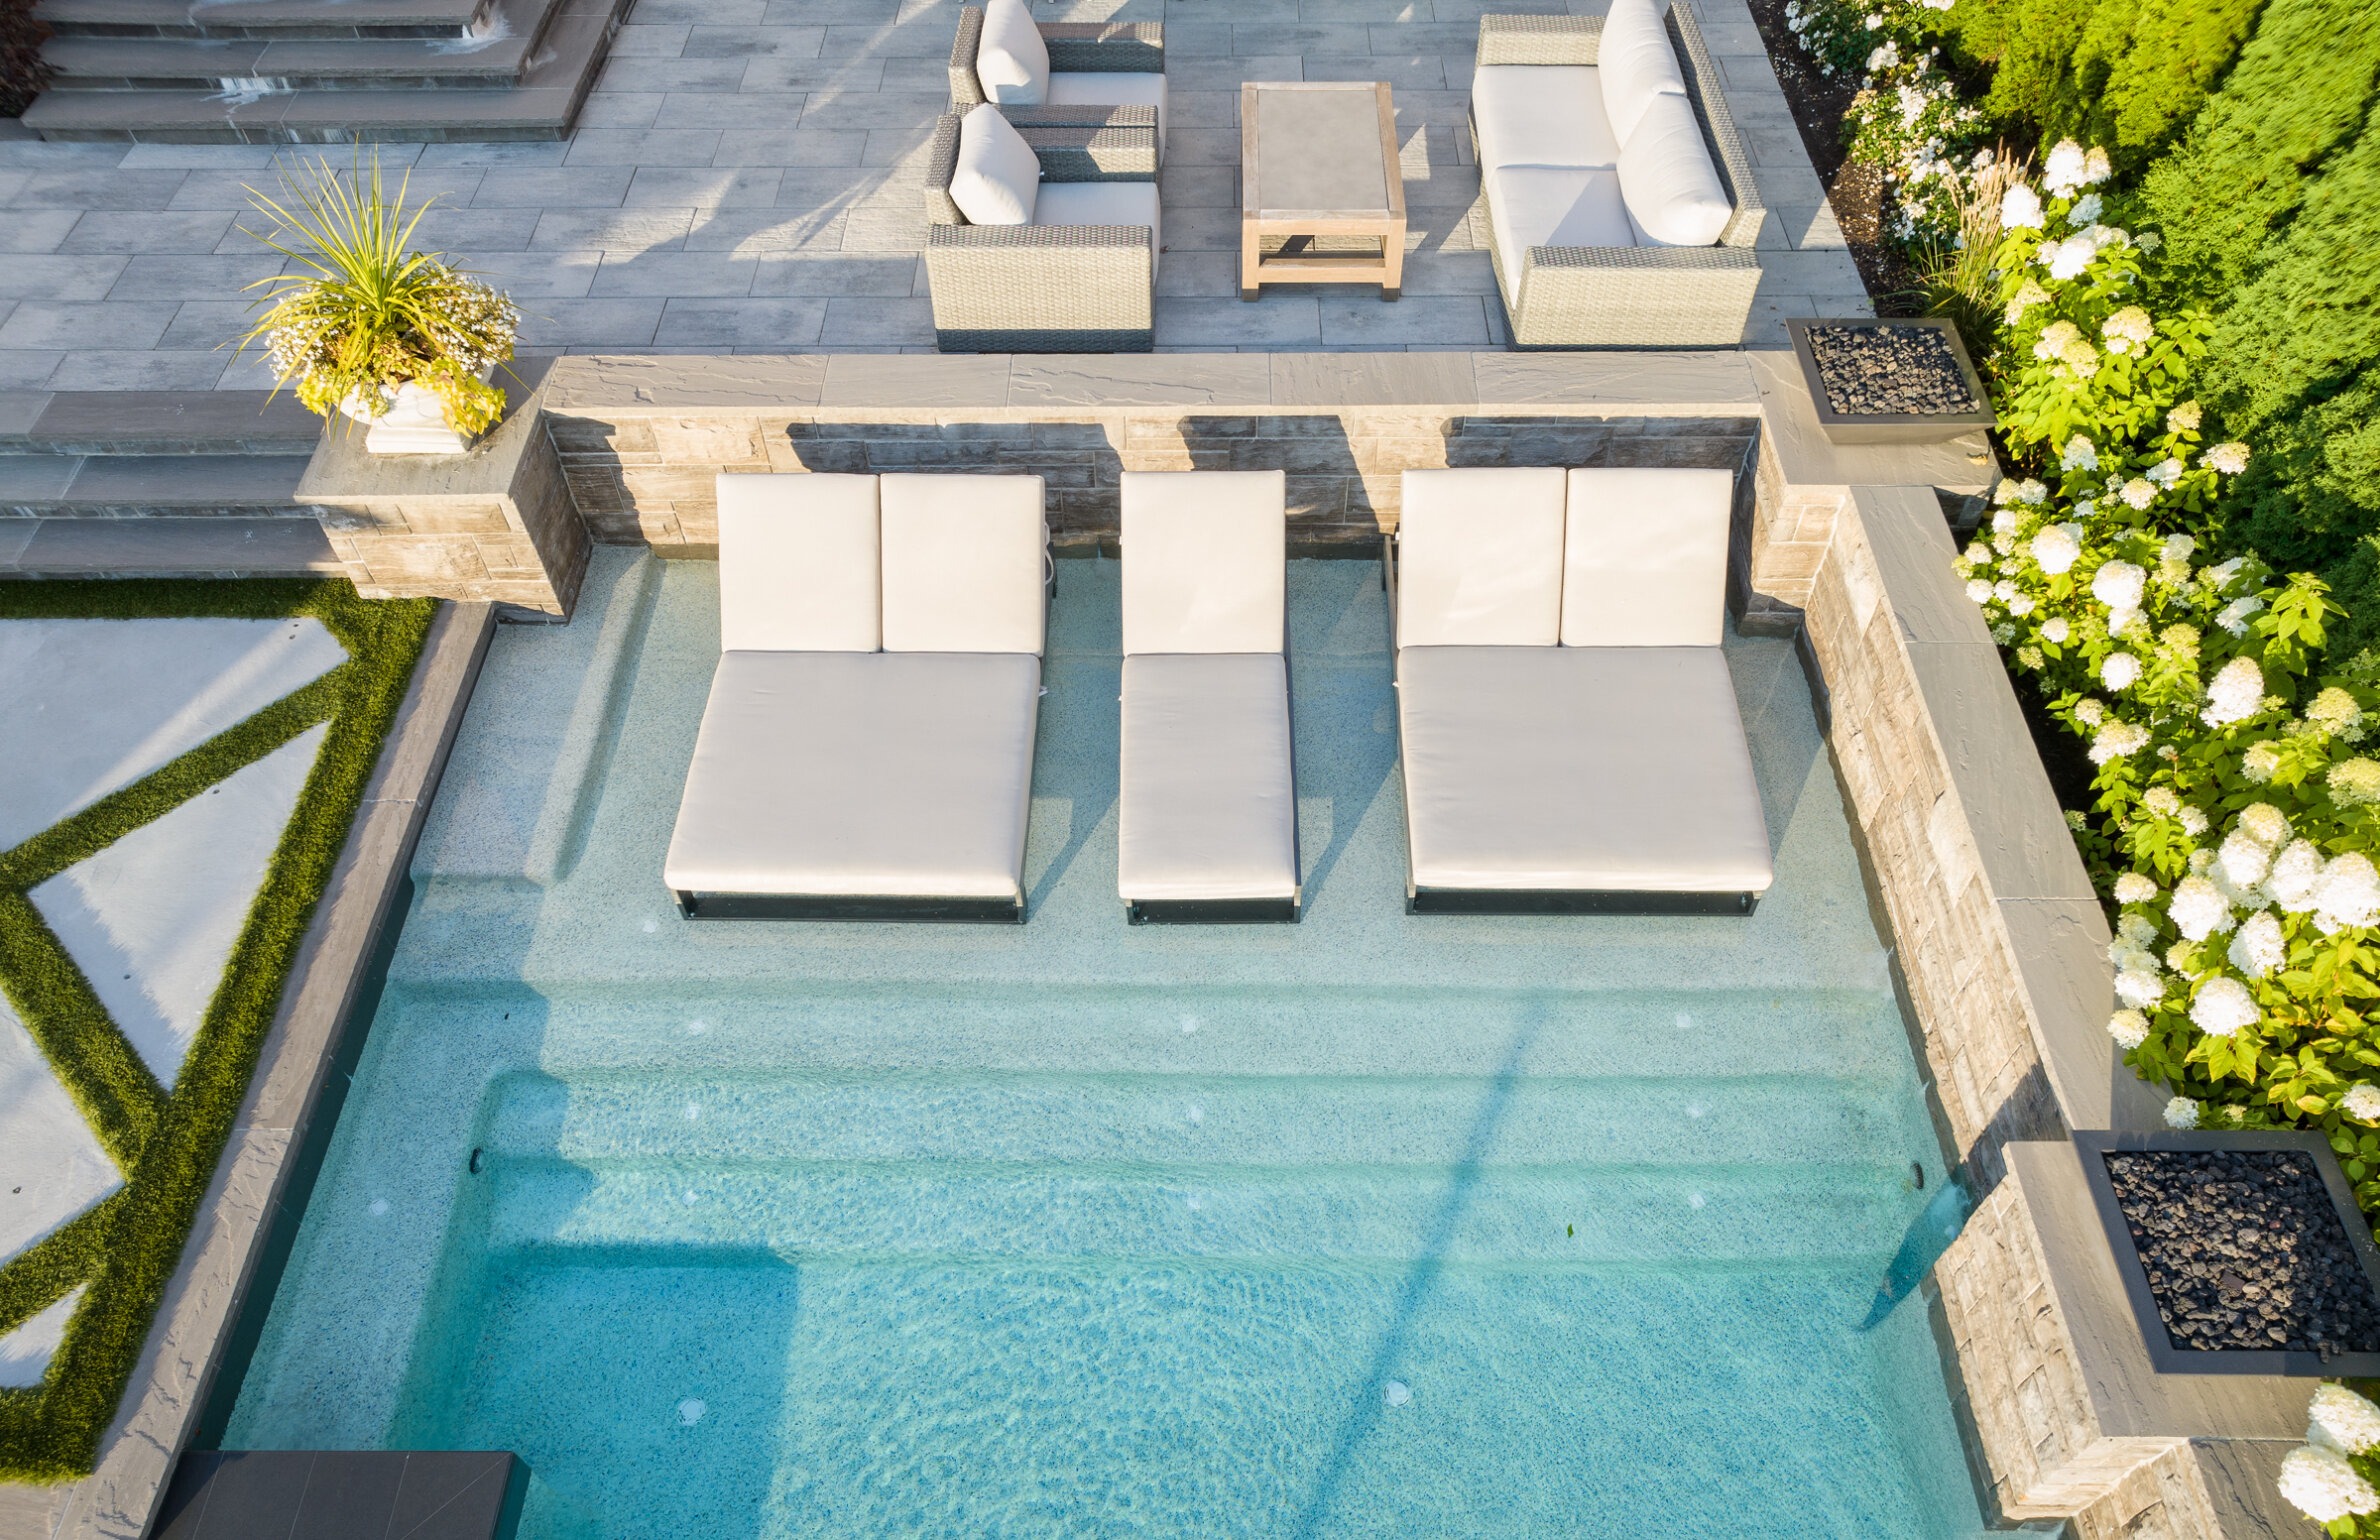 An aerial view shows a luxurious pool with clear blue water, surrounded by sun loungers, outdoor furniture, and lush greenery in a manicured garden.